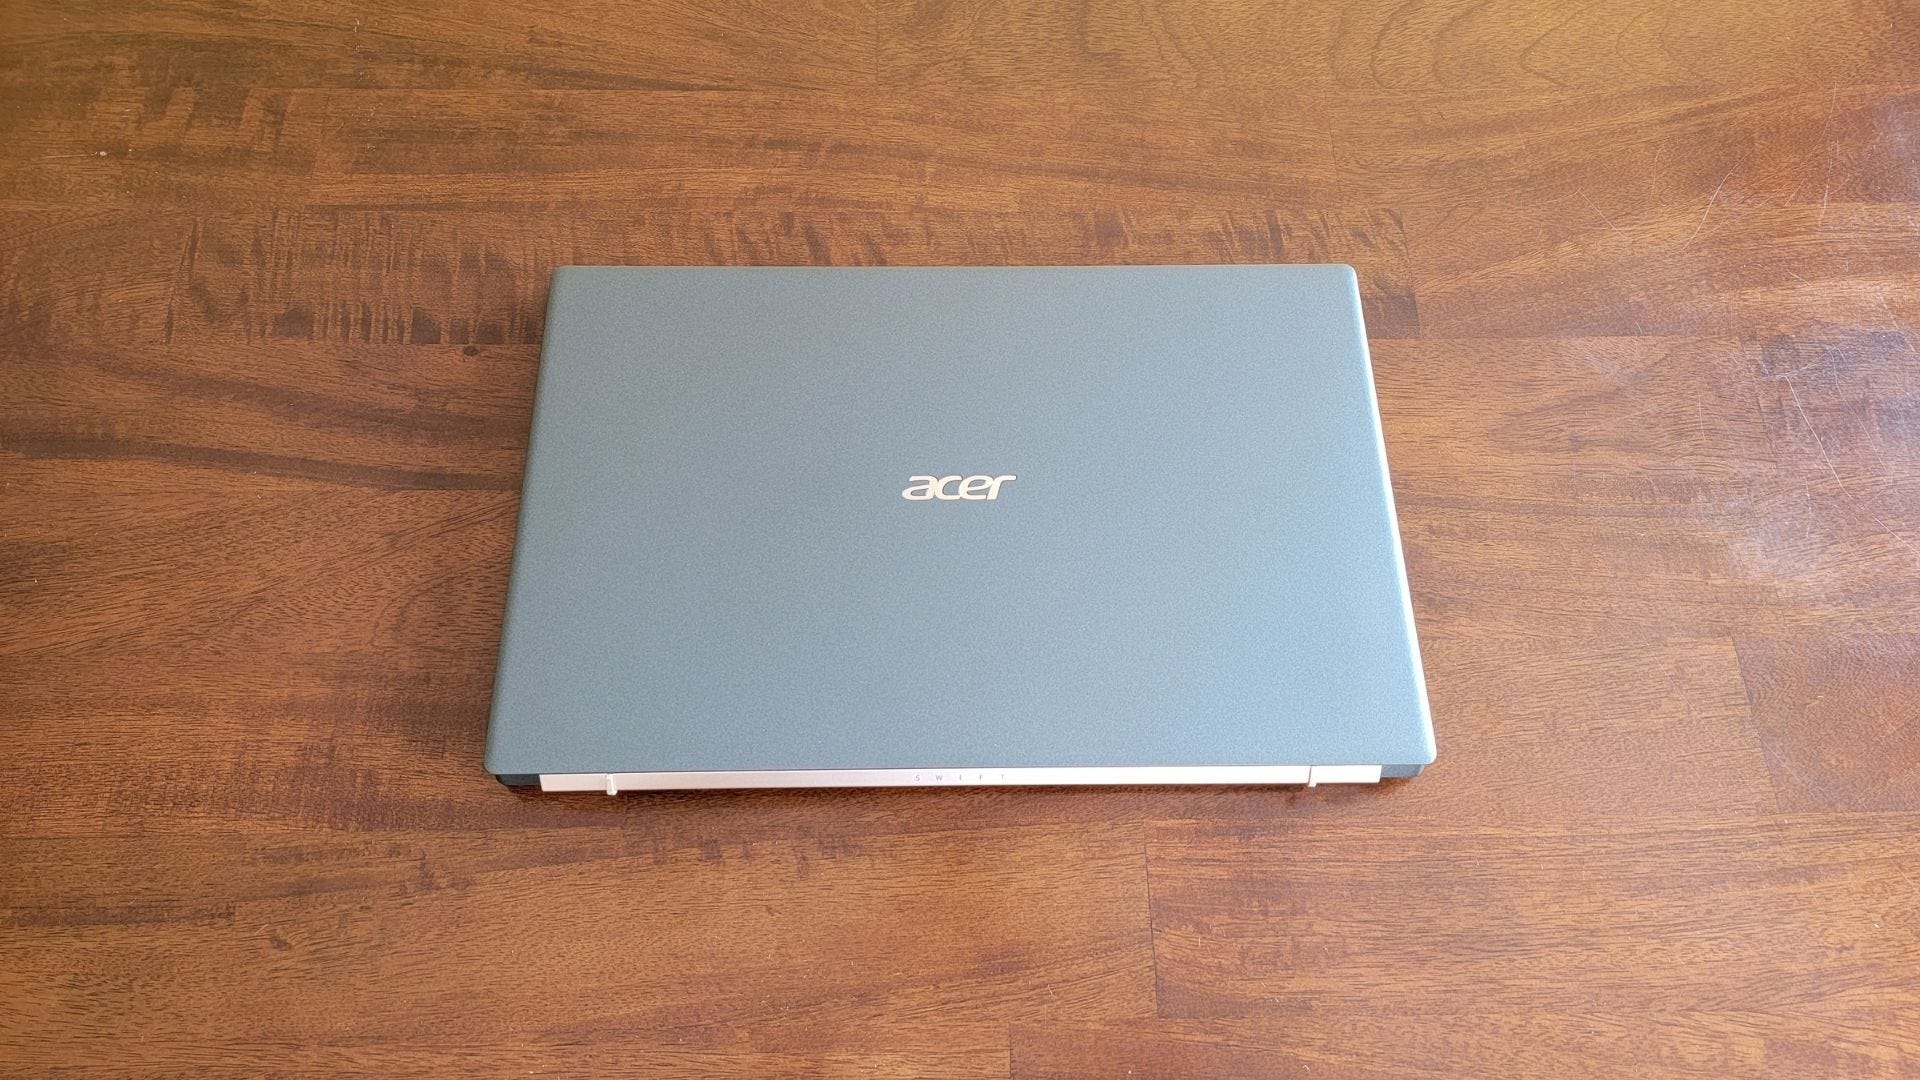 acer swift 5 laptop closed on a wooden table